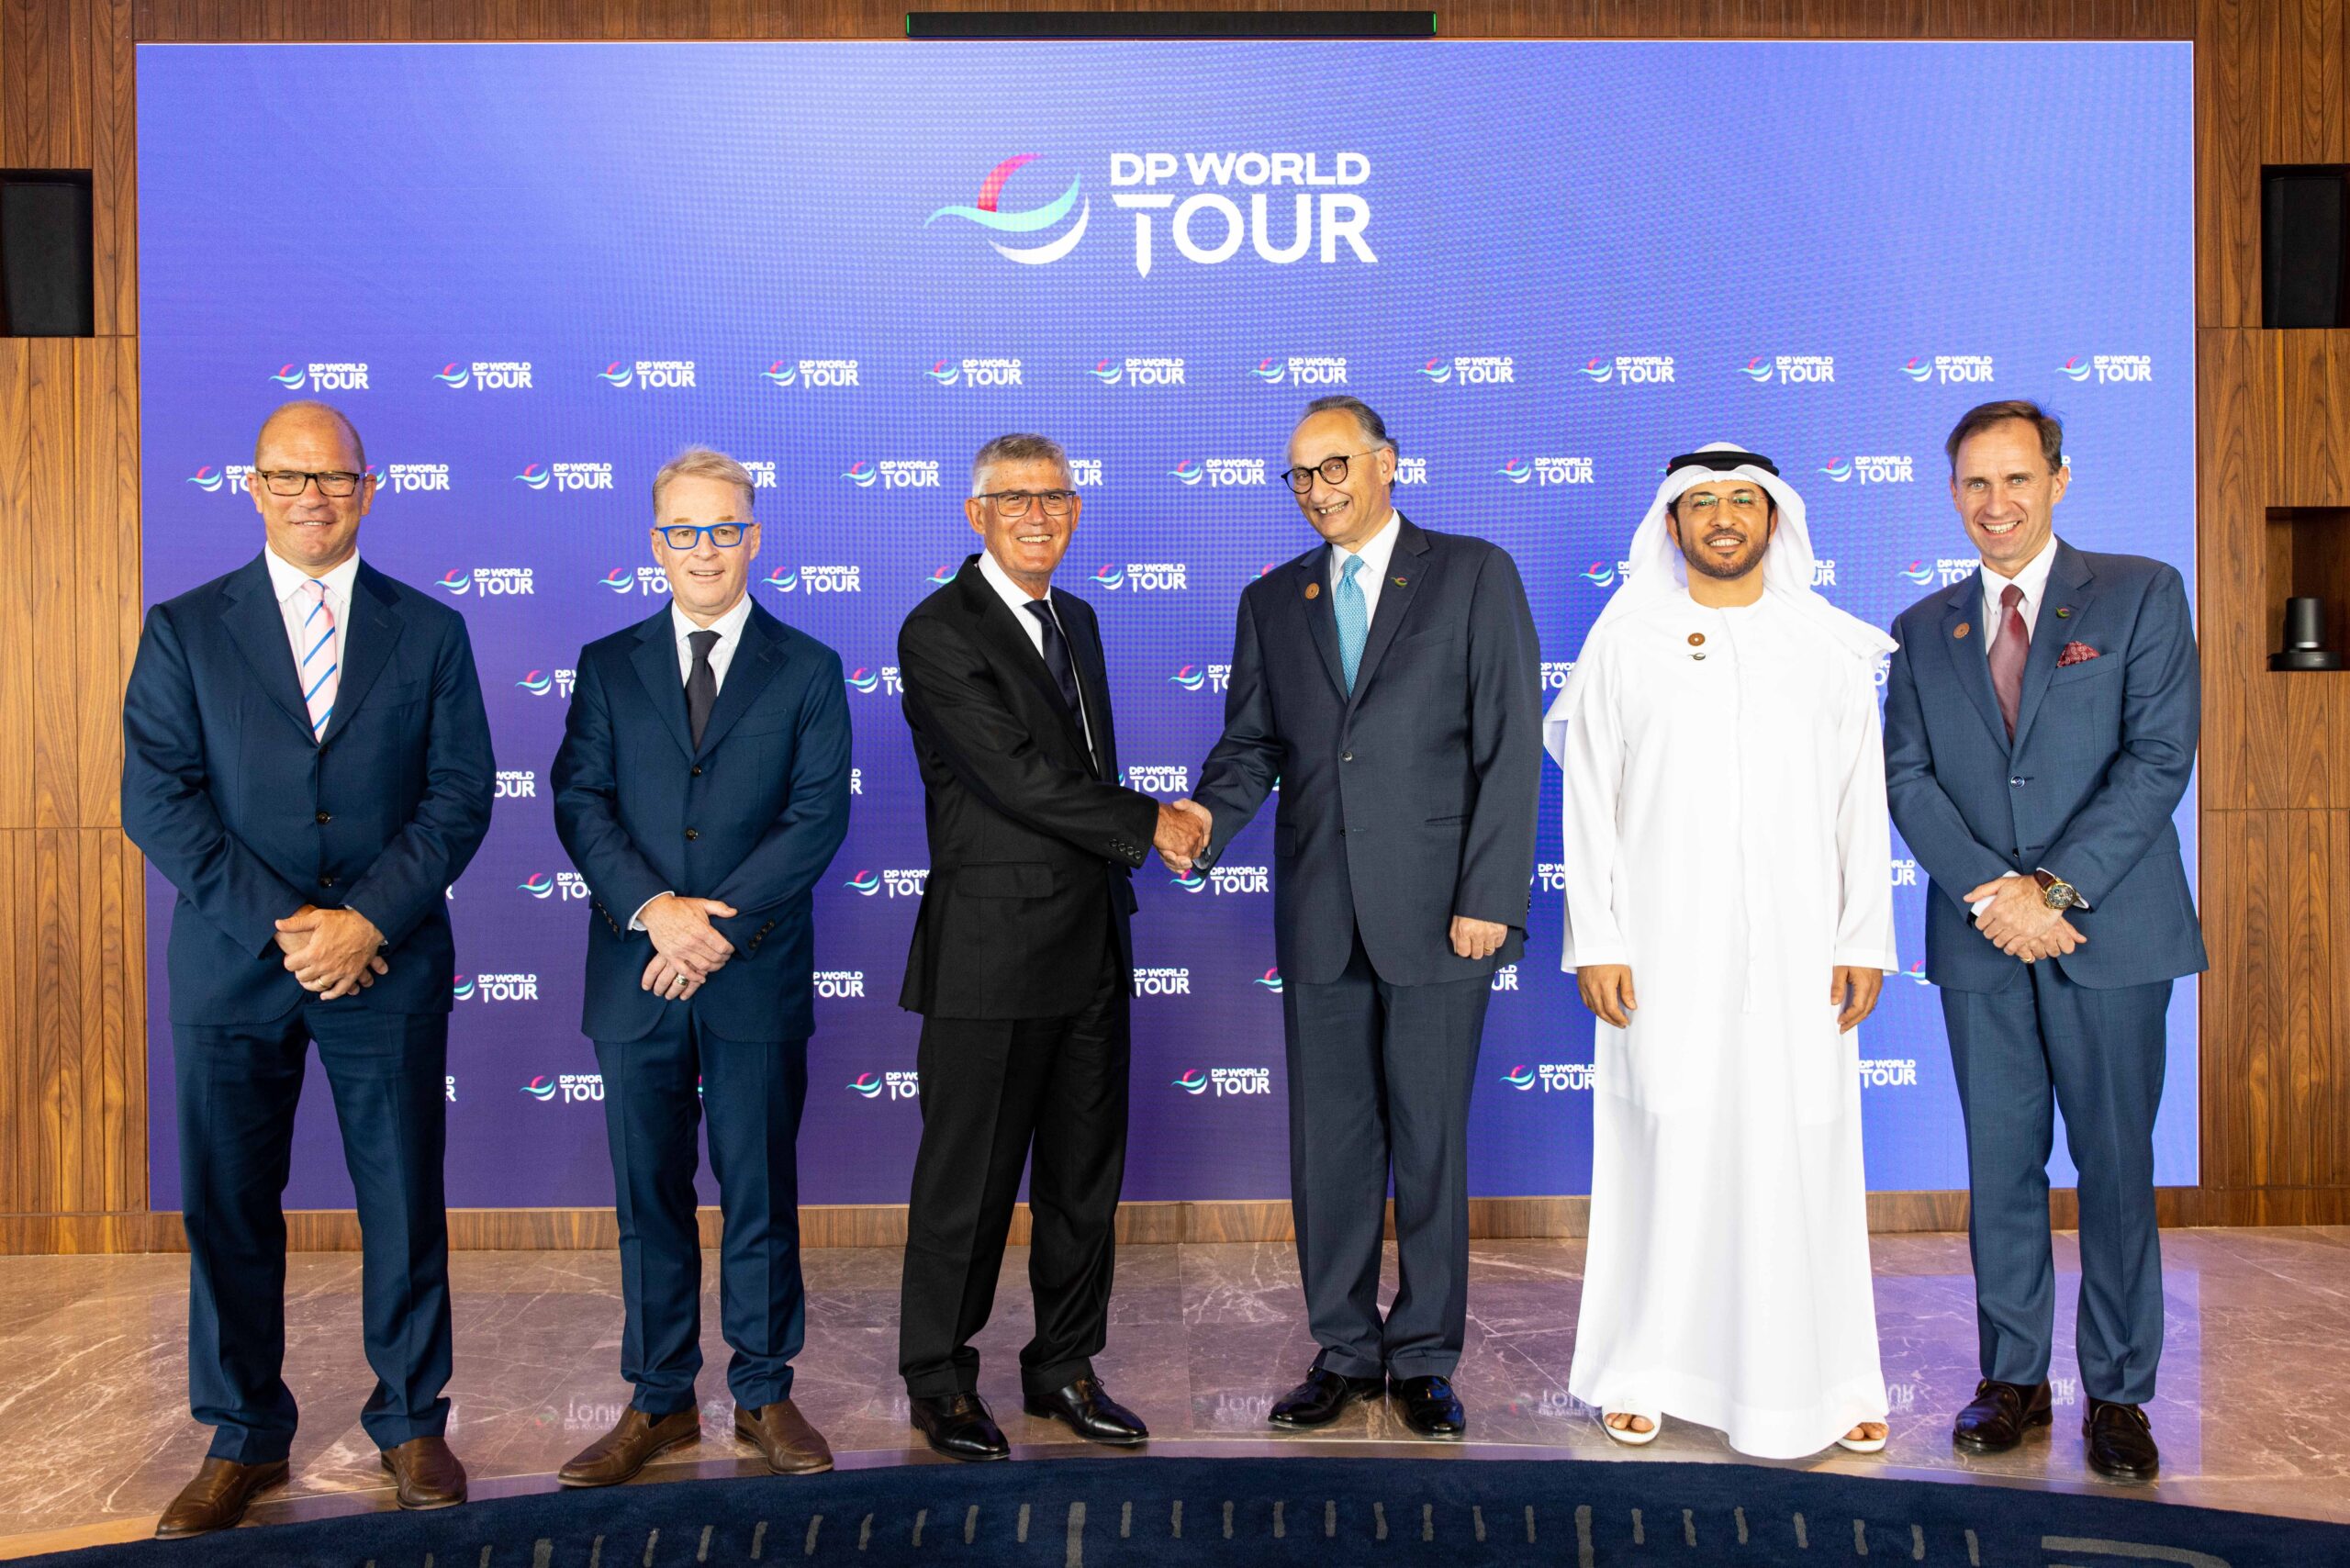 European Tour to become the DP World Tour from 2022